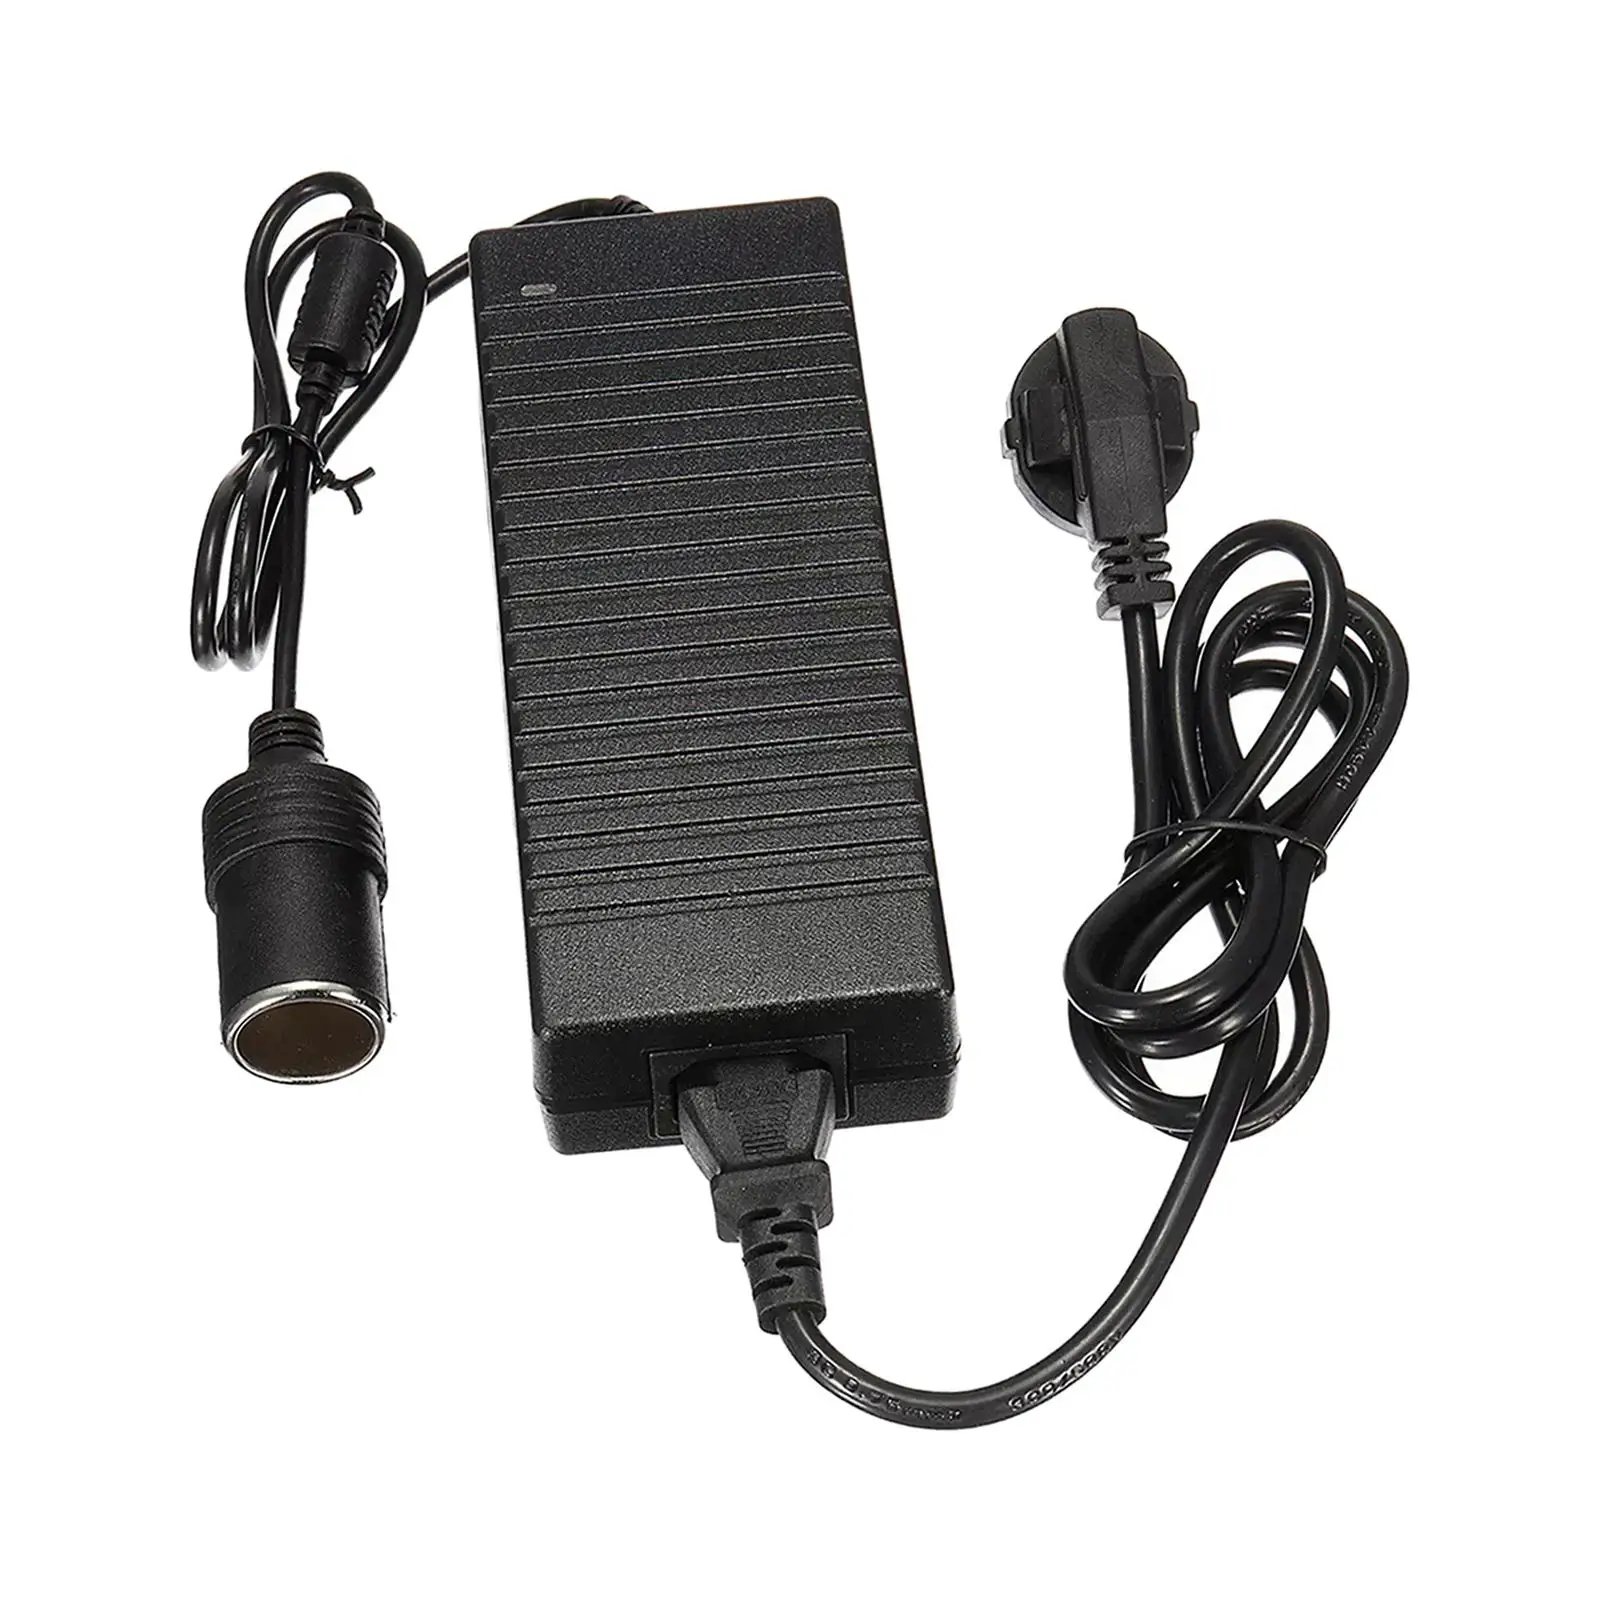 AC to DC Power Converter Adapter 100V-240V to 12V 120W Inverter for Car Vacuum Cleaner Portable Air Compressor Fan MP3